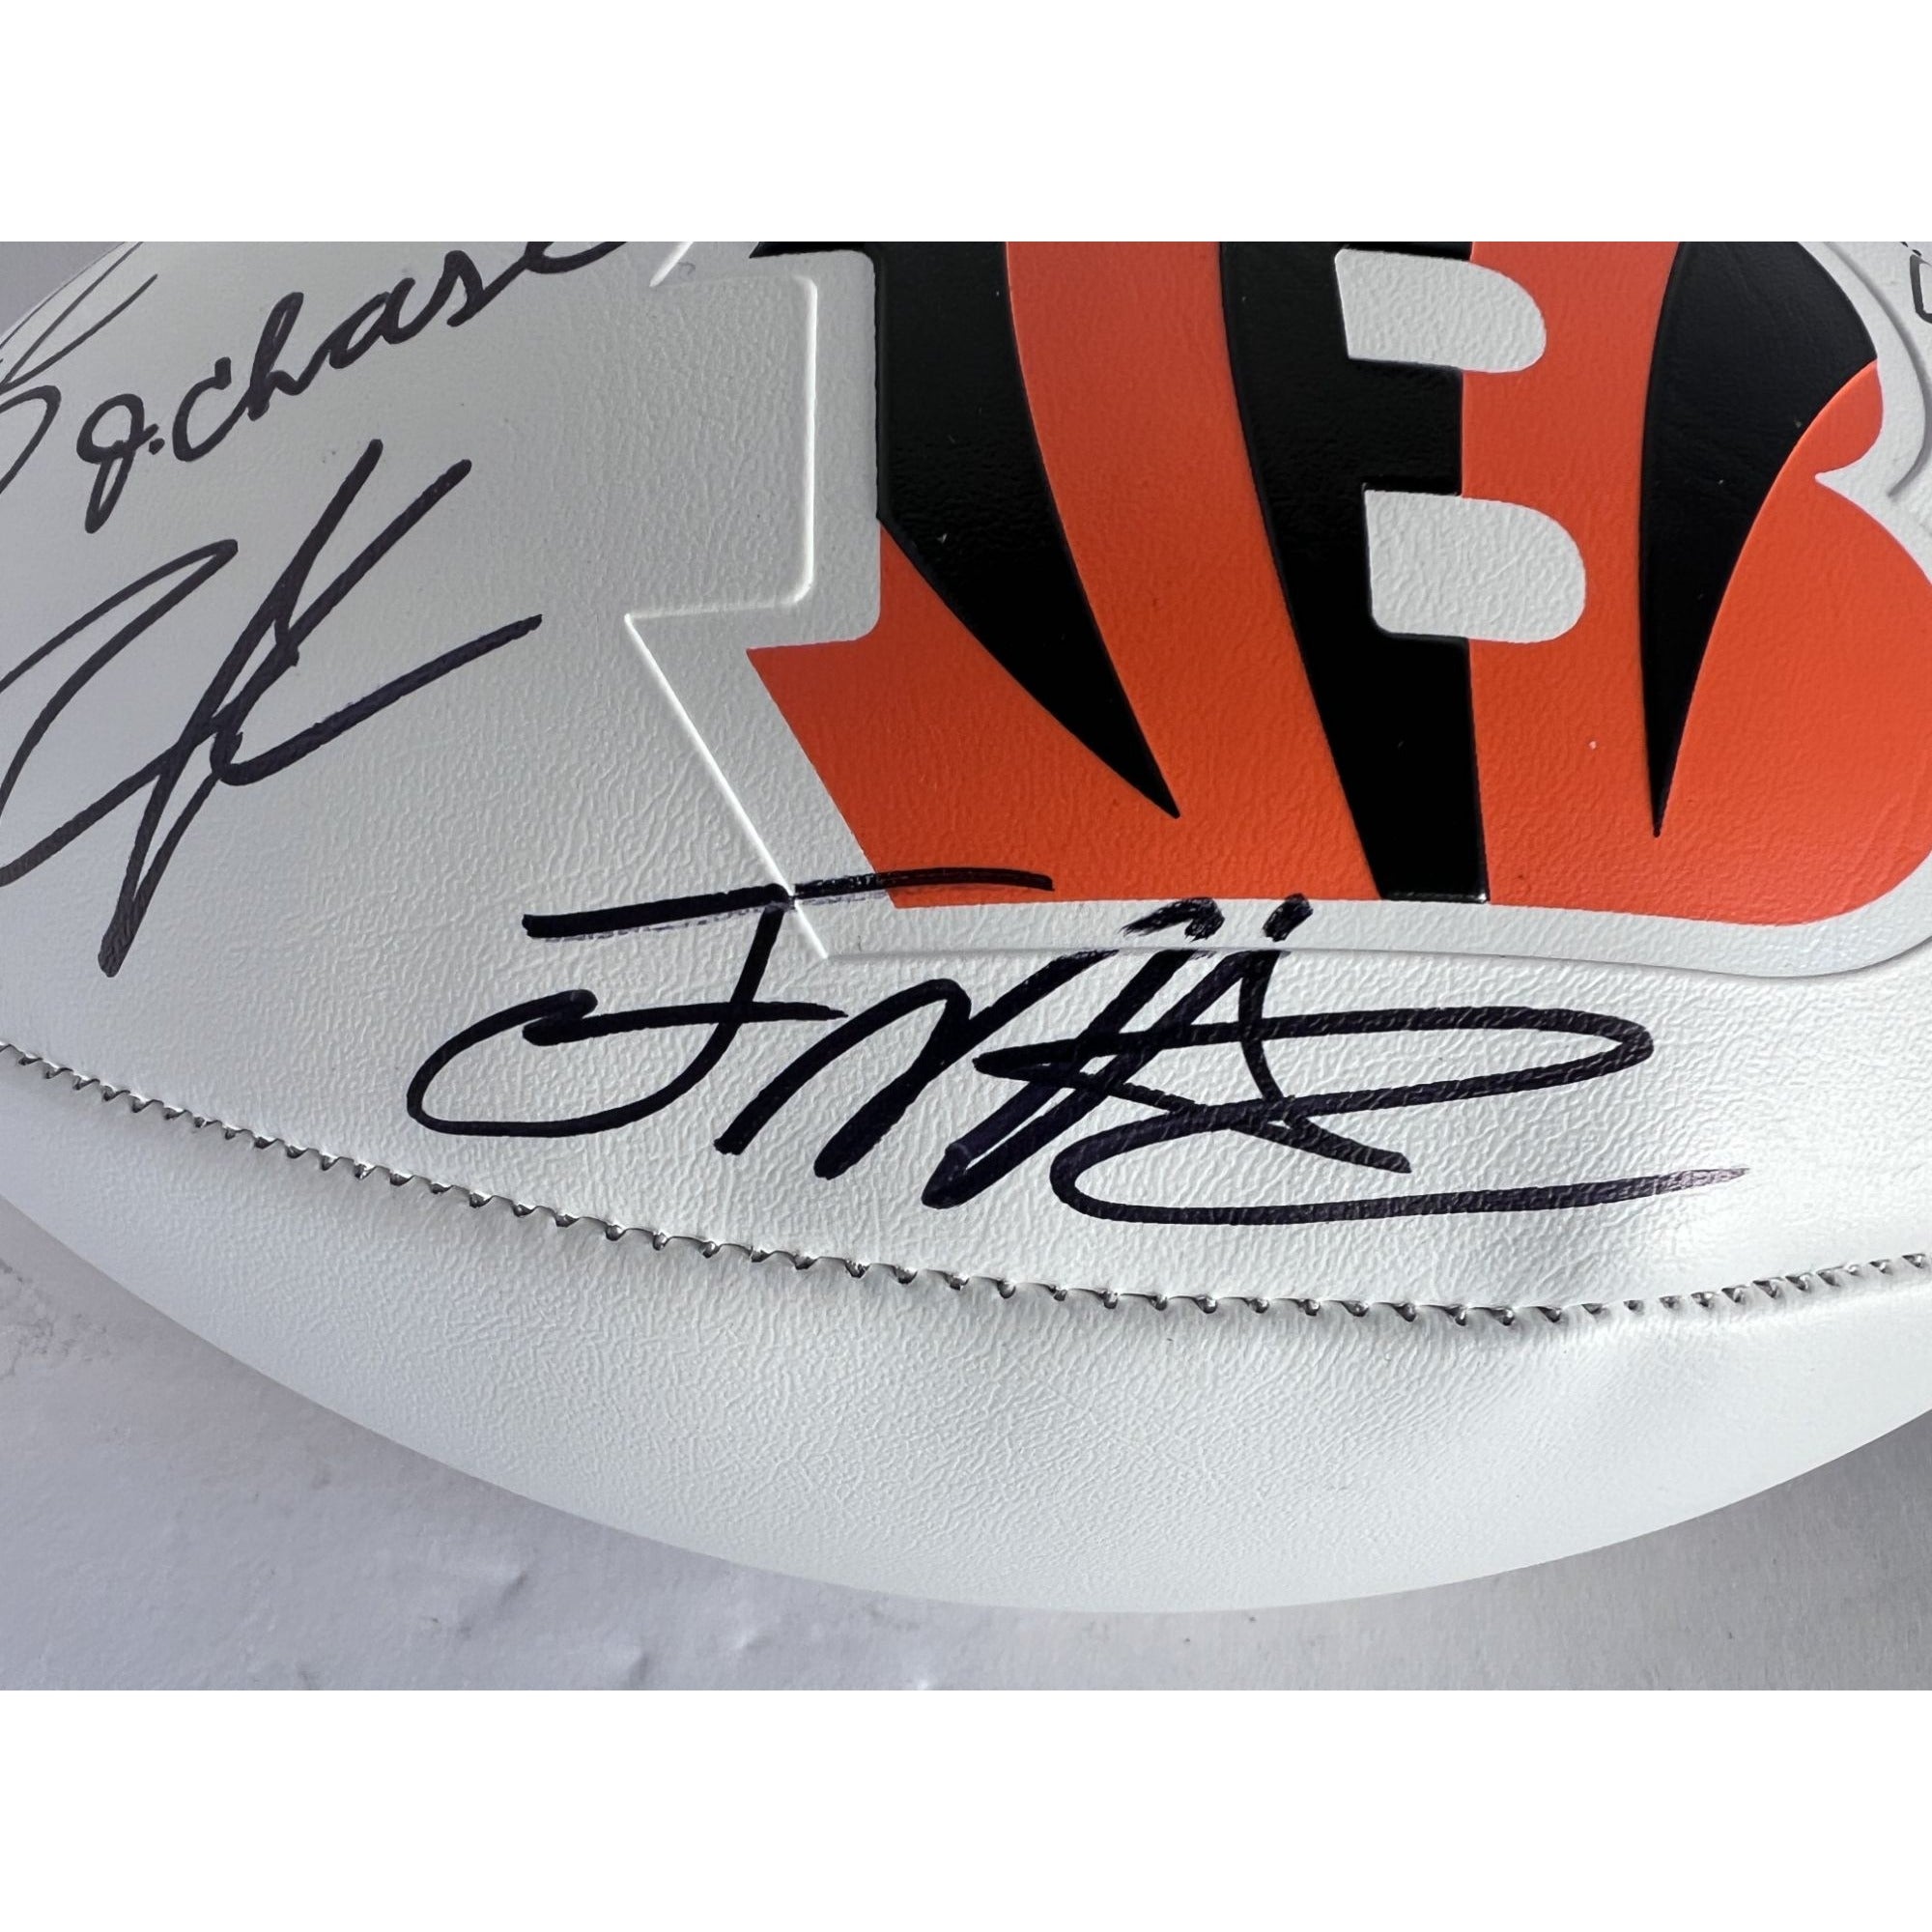 Joe Burrow and Ja'Marr Chase, Joe Mixon, Zach Taylor and more Cincinnati Bengals full size Bengals football signed with proof